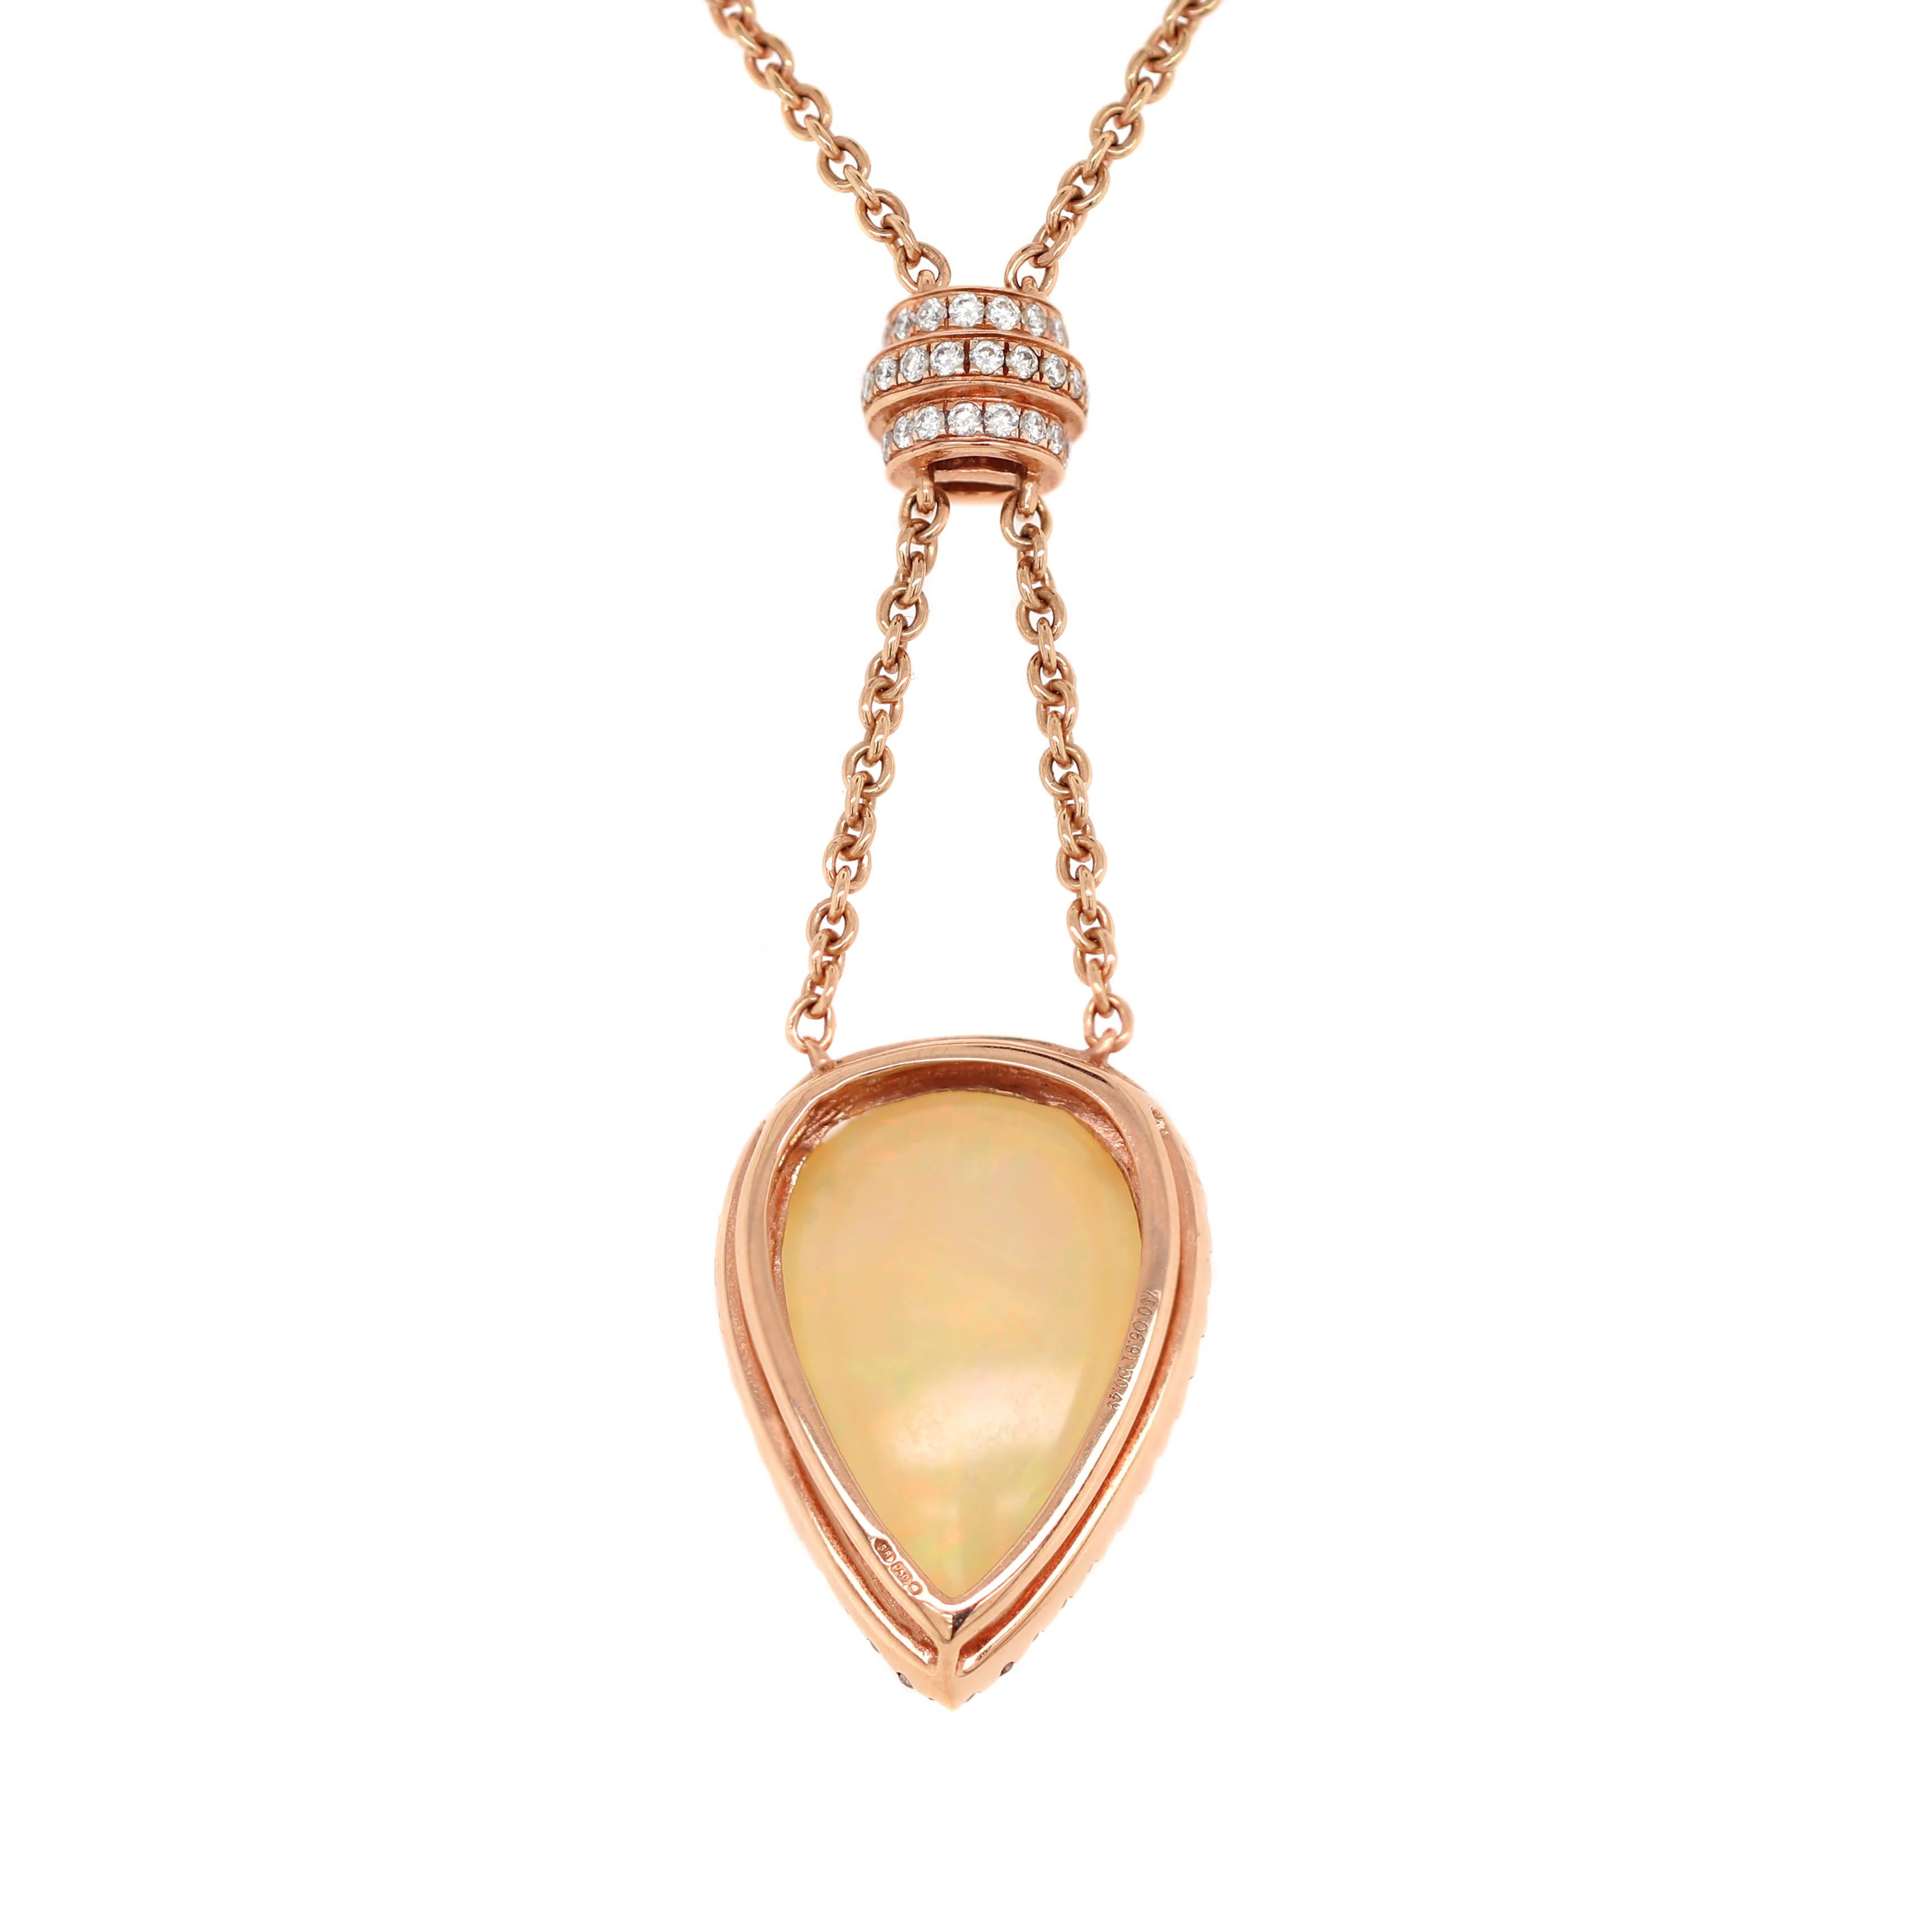 This beautiful piece features a lustrous pear shaped Ethiopian cabochon opal weighing 6.91ct mounted in a three, double claw, open back setting. The opal is beautifully surrounded by 42 round brilliant cut diamonds connected to a fine 18